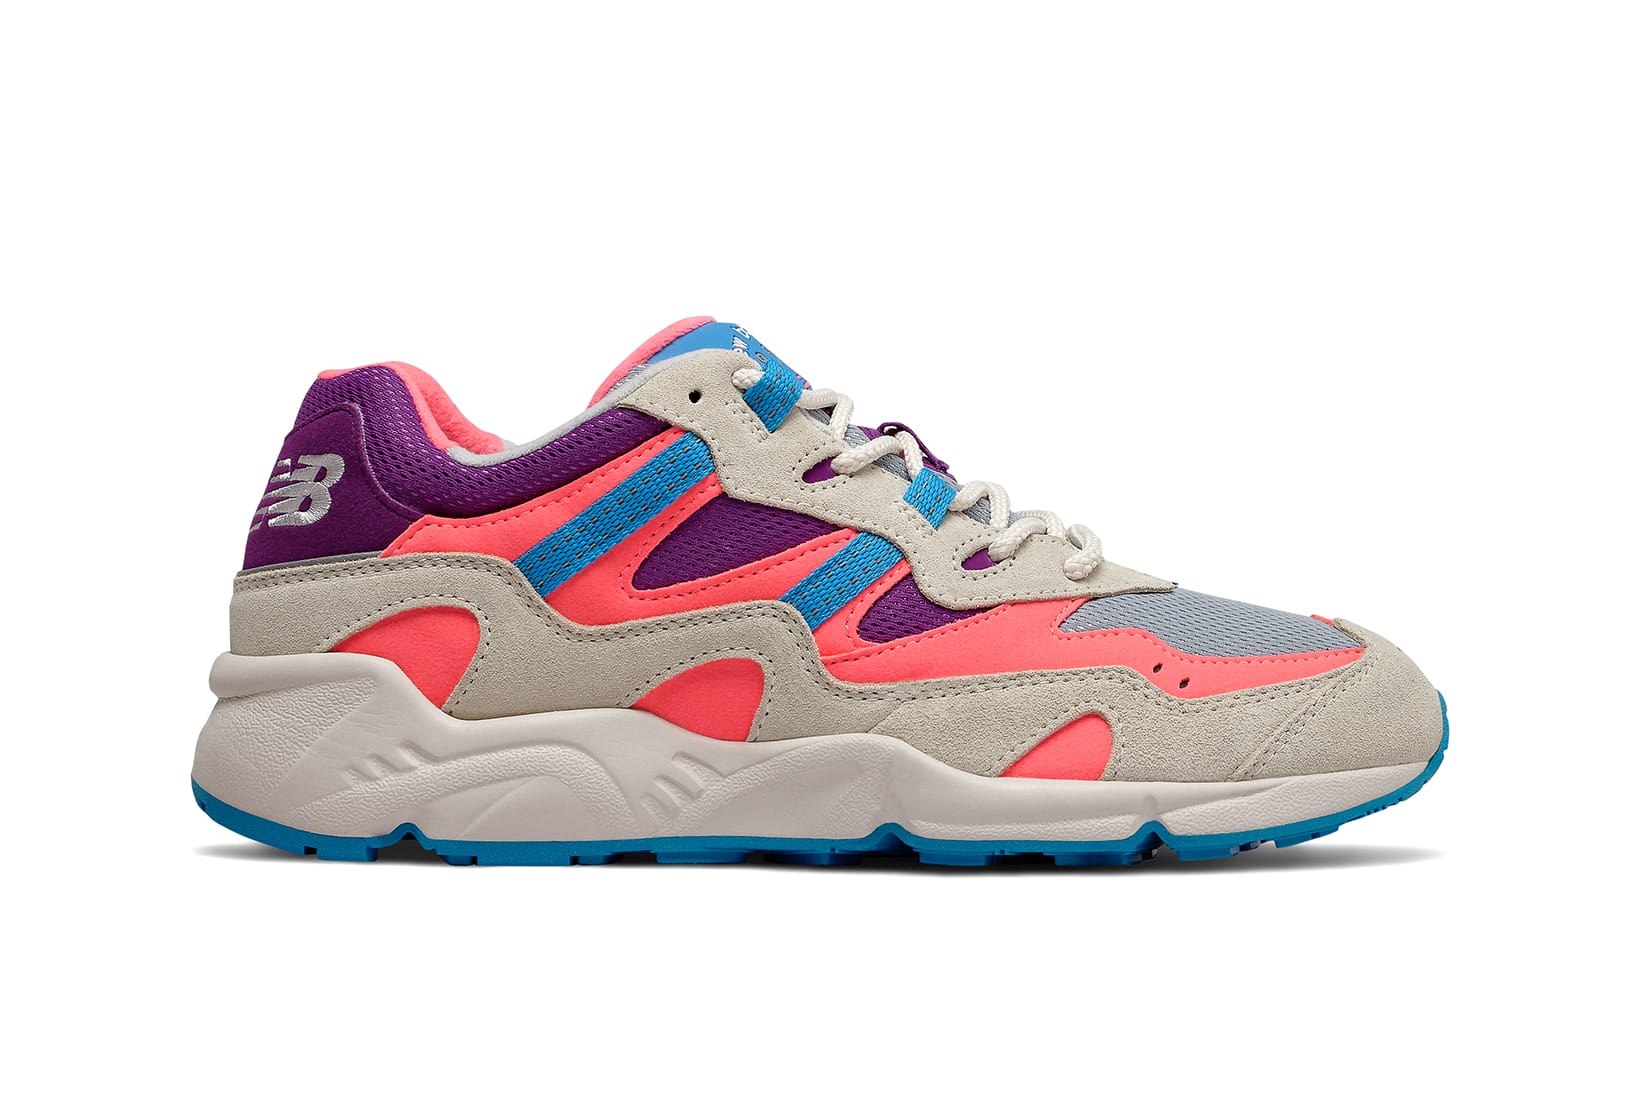 New Balance 850 in Pastel Pink, Neon 